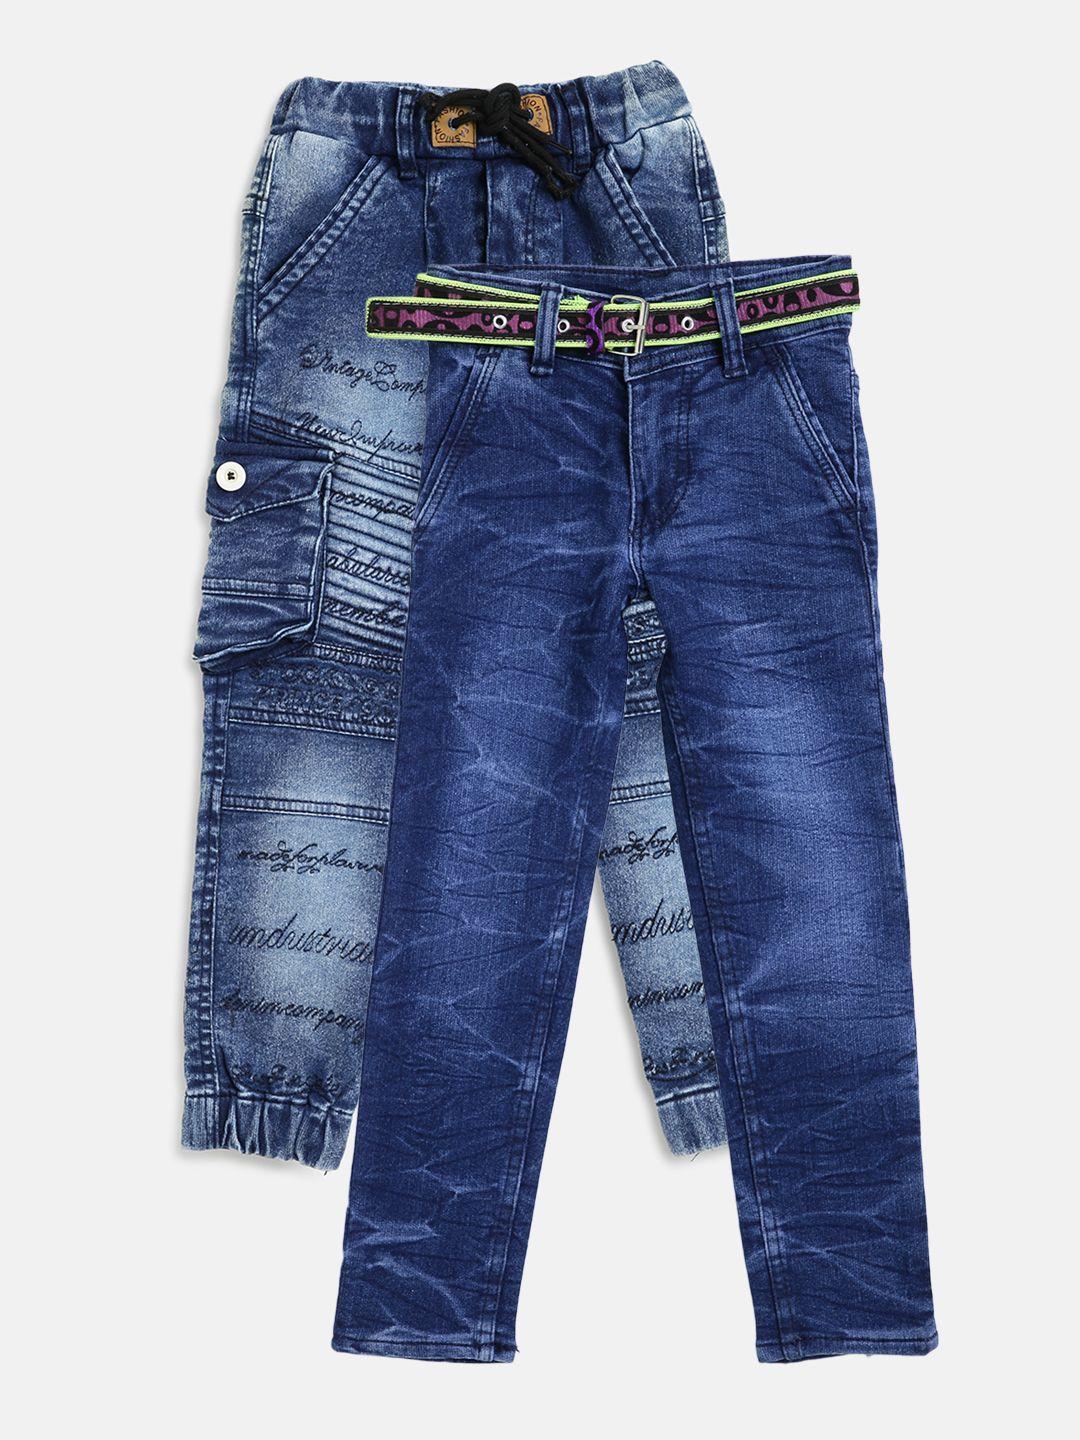 ad & av boys pack of blue washed jeans & denim cargo joggers